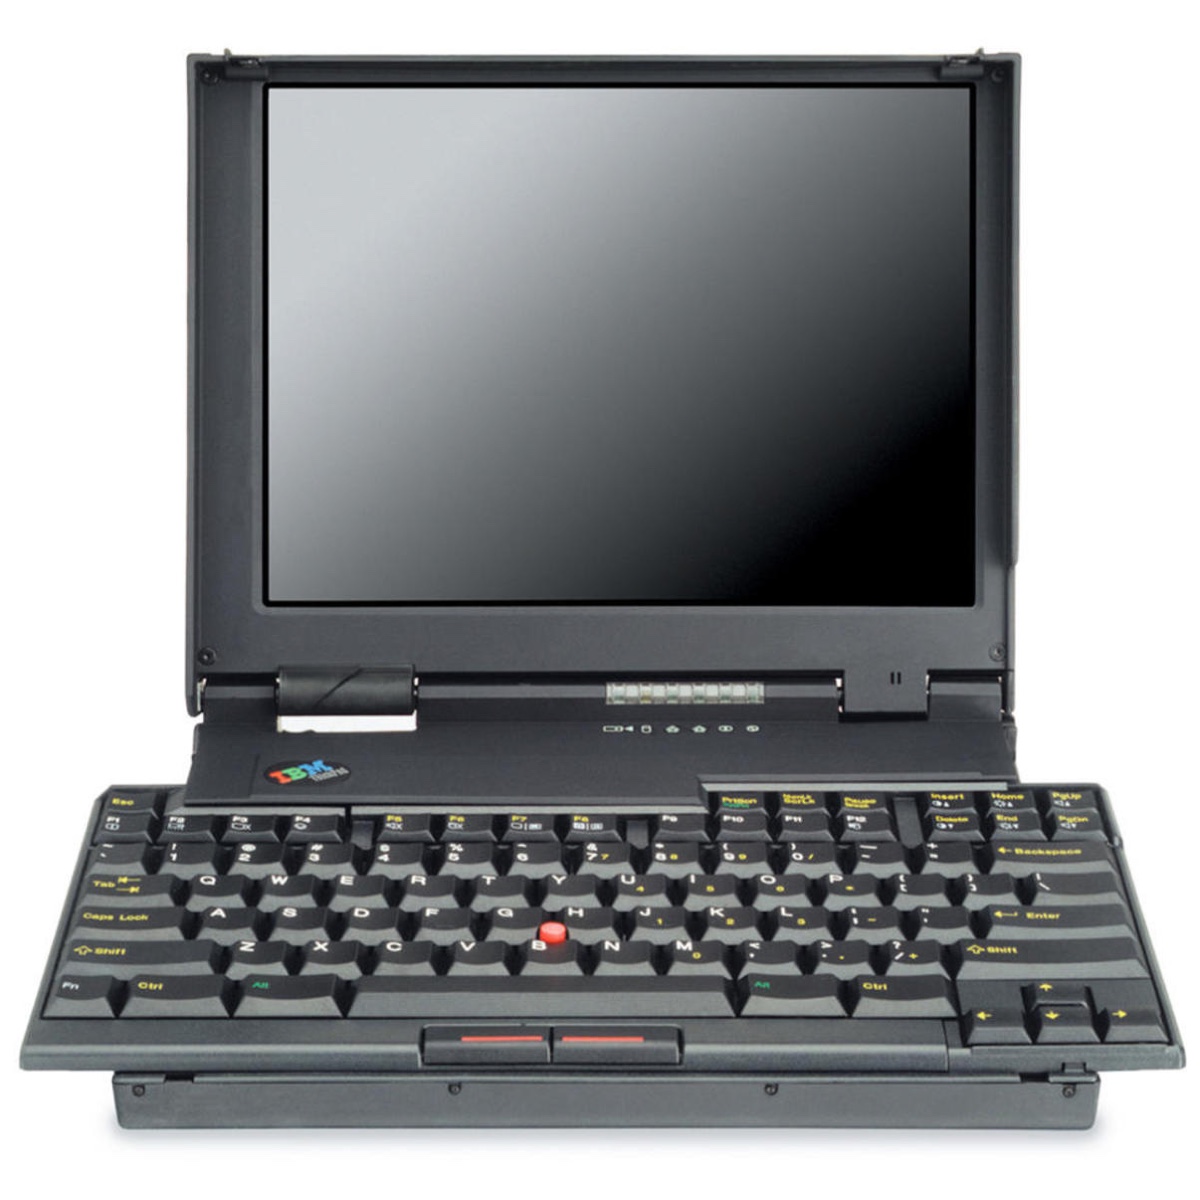 The ThinkPad 701 laptop (1996) for IBM was designed by Richard Sapper with  Sam Lucente and John Karidis. It is included in the Permanent Design Collection at MoMA. Image courtesy of Richard Sapper.